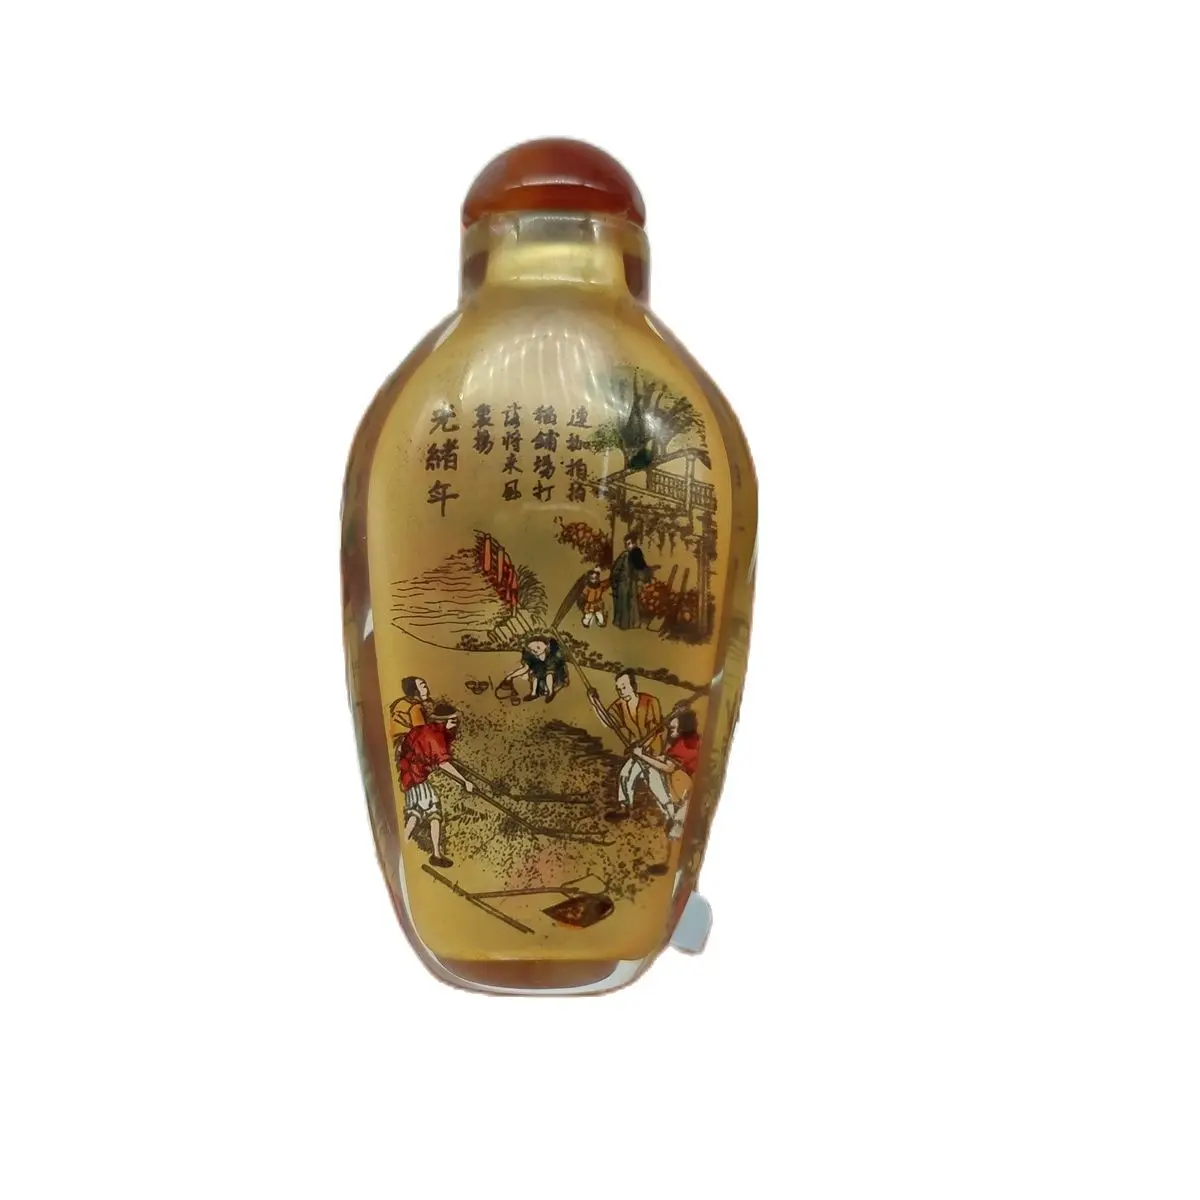 

bejing inside painted snuff bottle glass bottles Inner reverse painting chinese people gifts snuffbox peking christmas collect